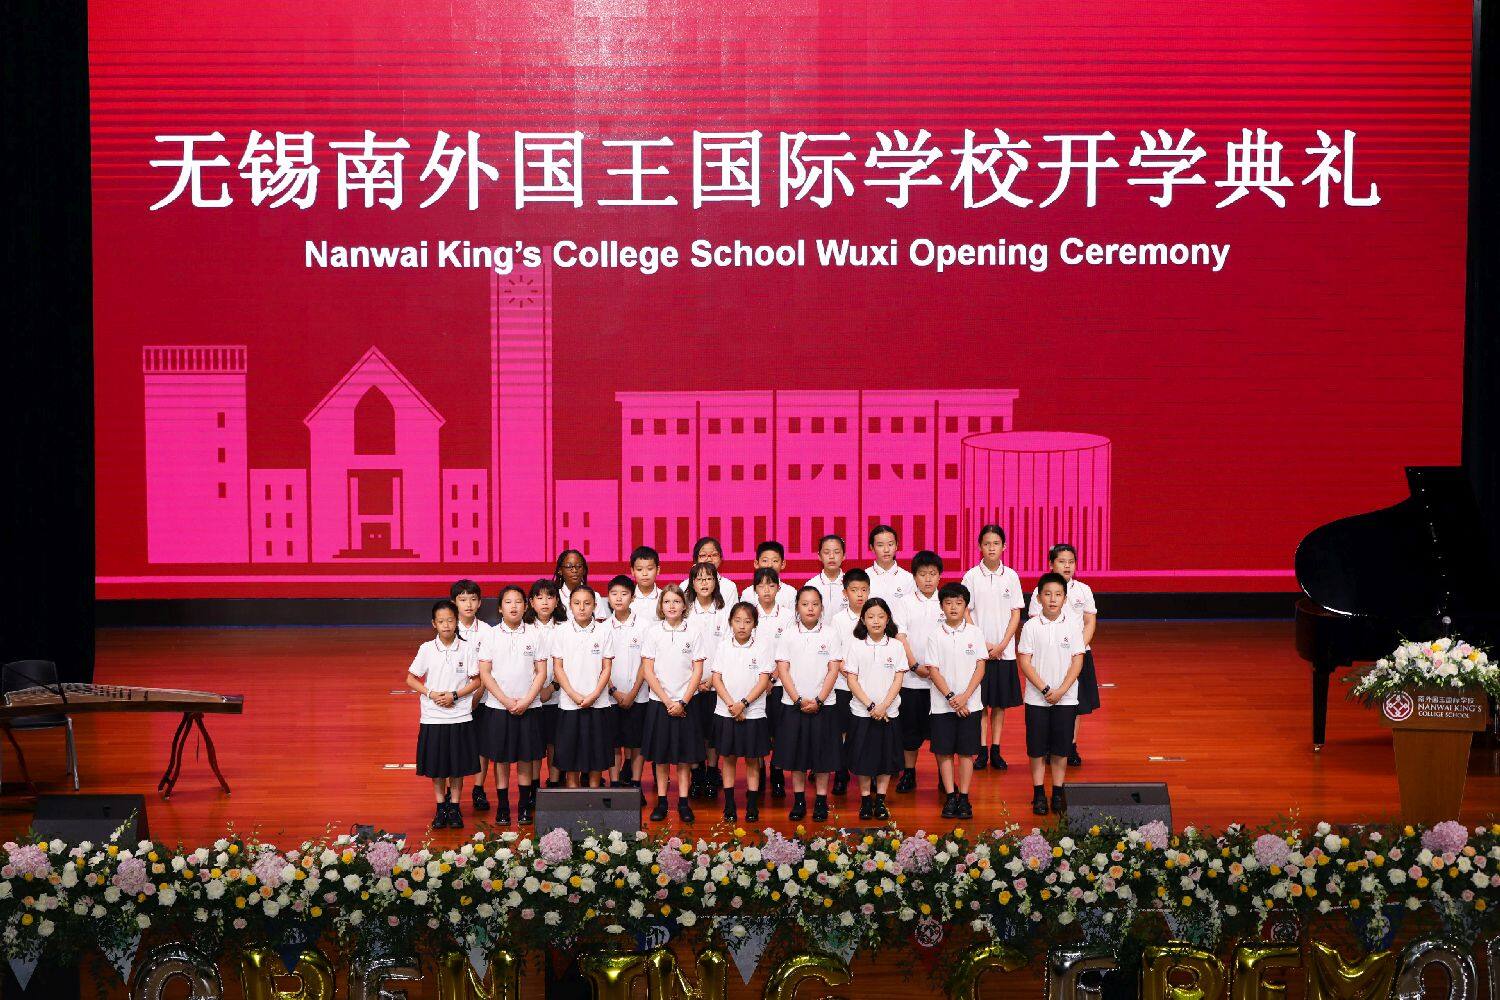 Student ceremony in a private school in China